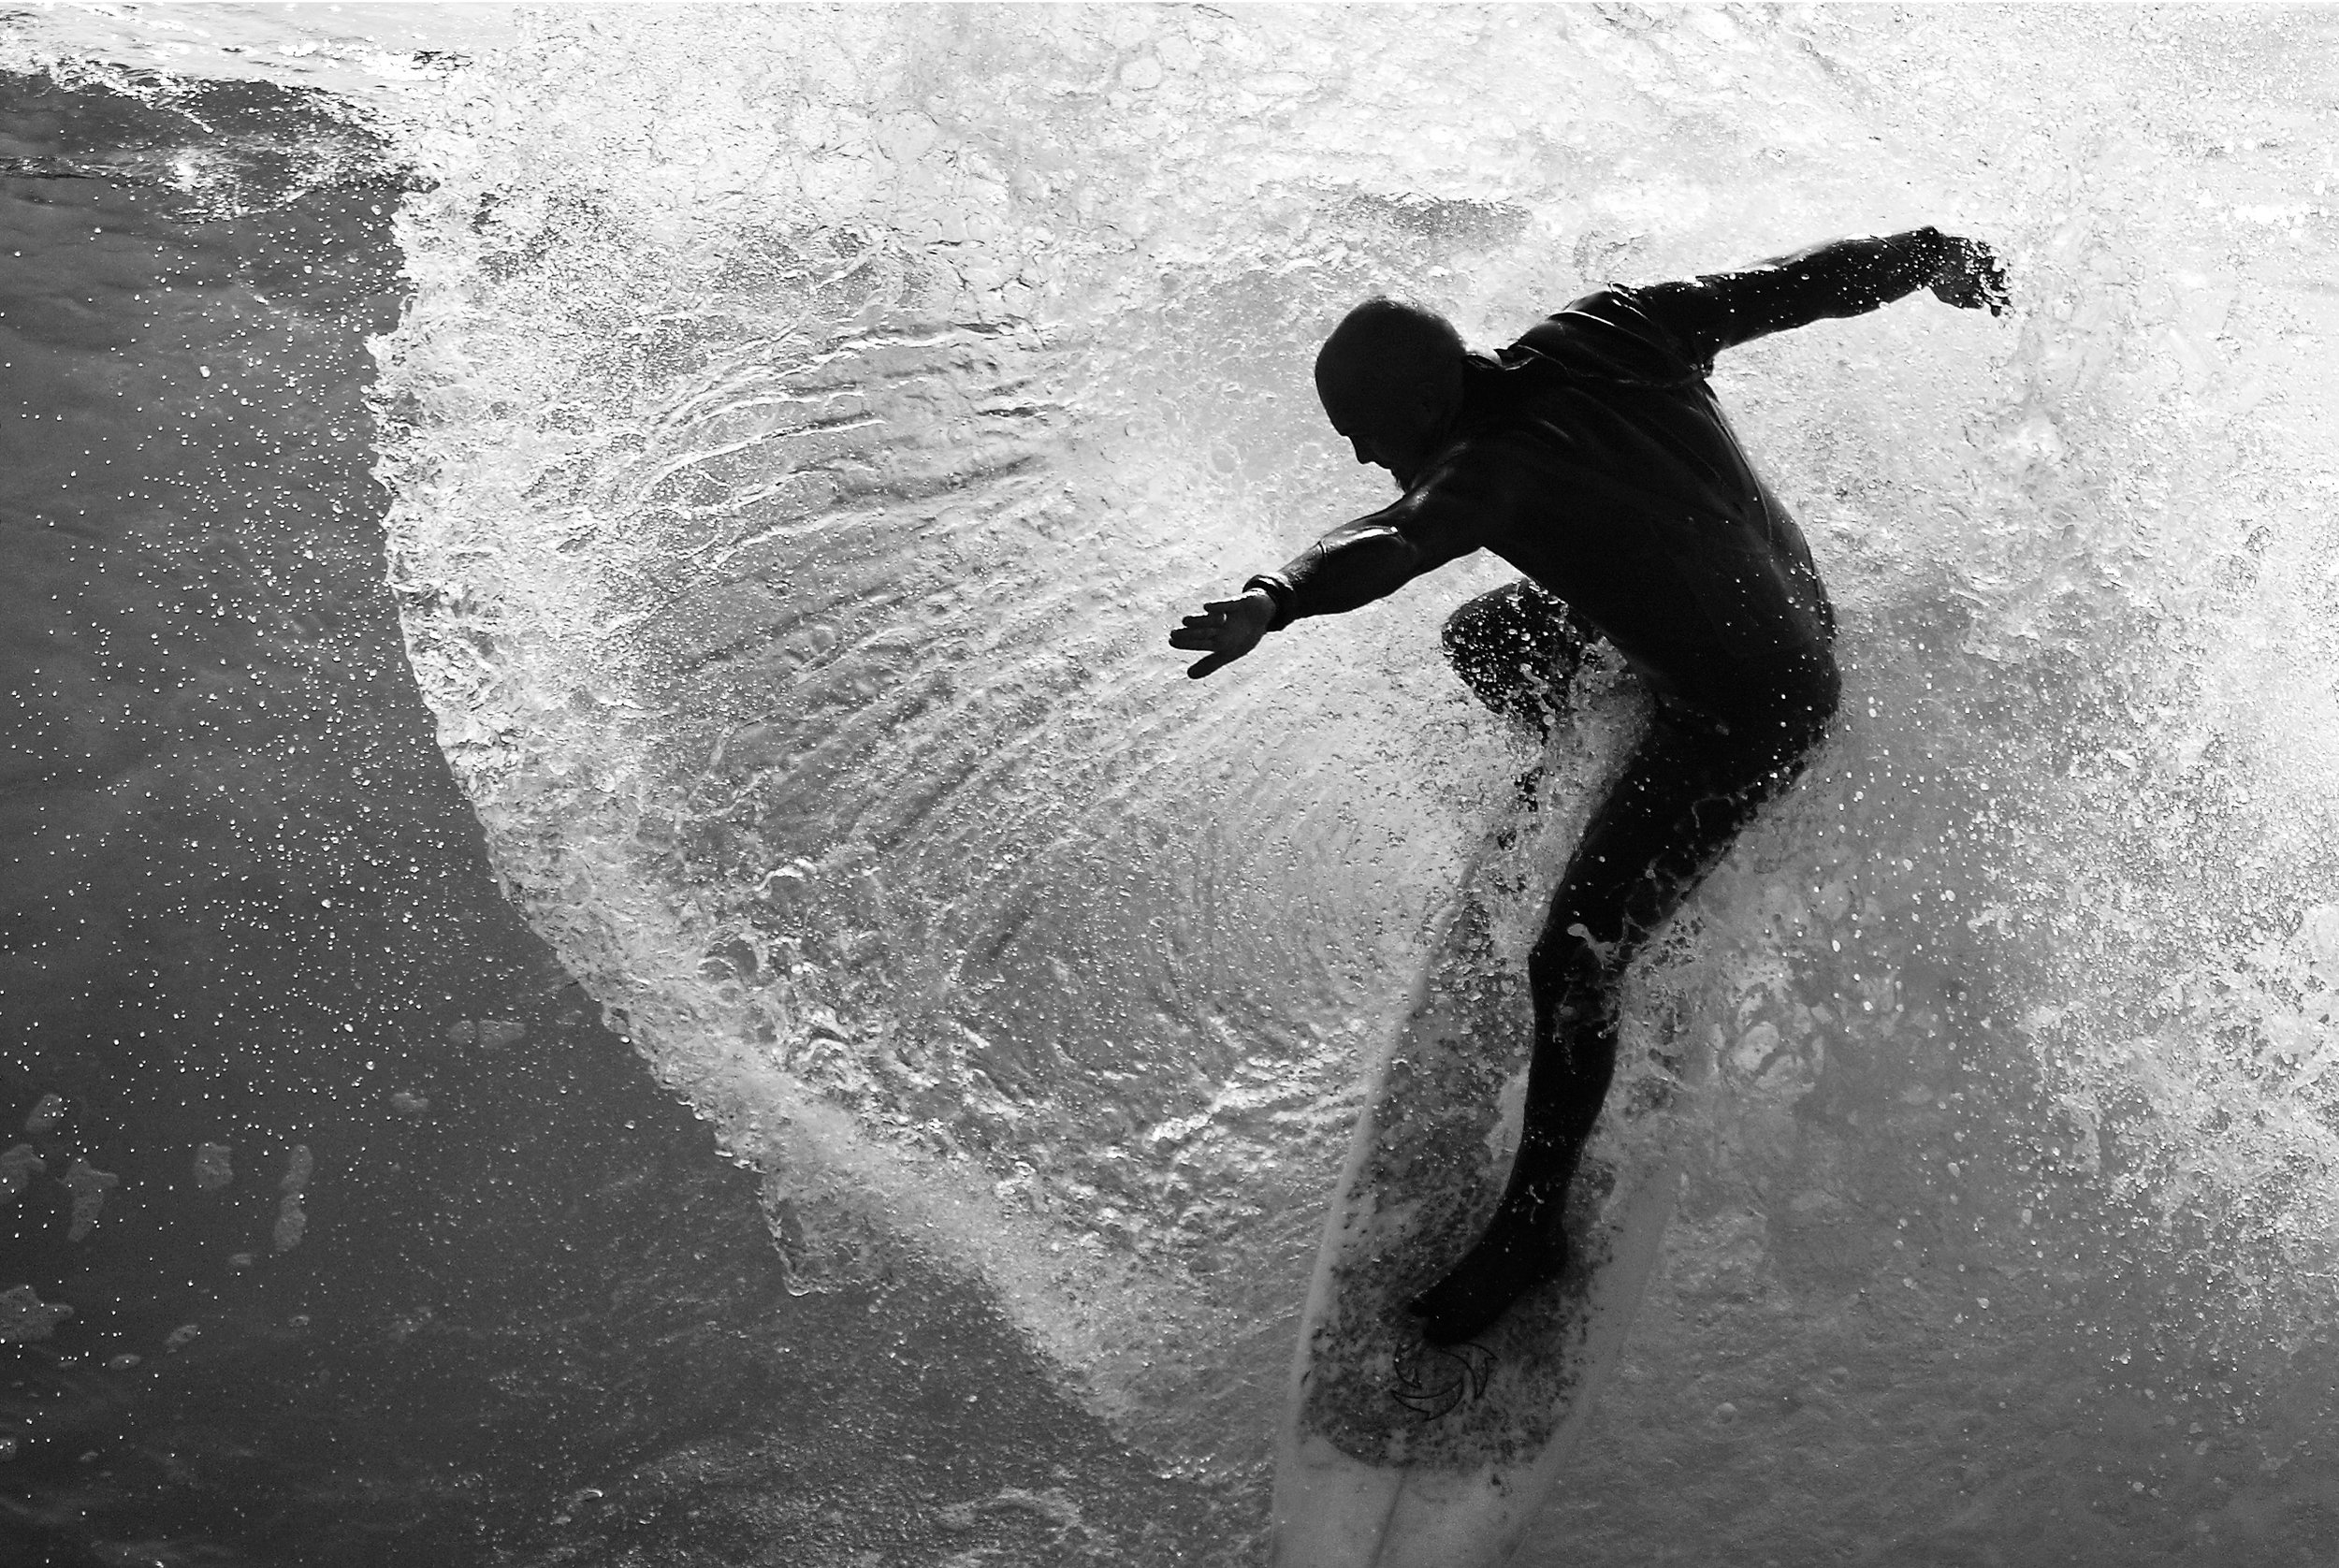 Canva+ +Grayscale+Photo+Of+Man+On+Surfboard